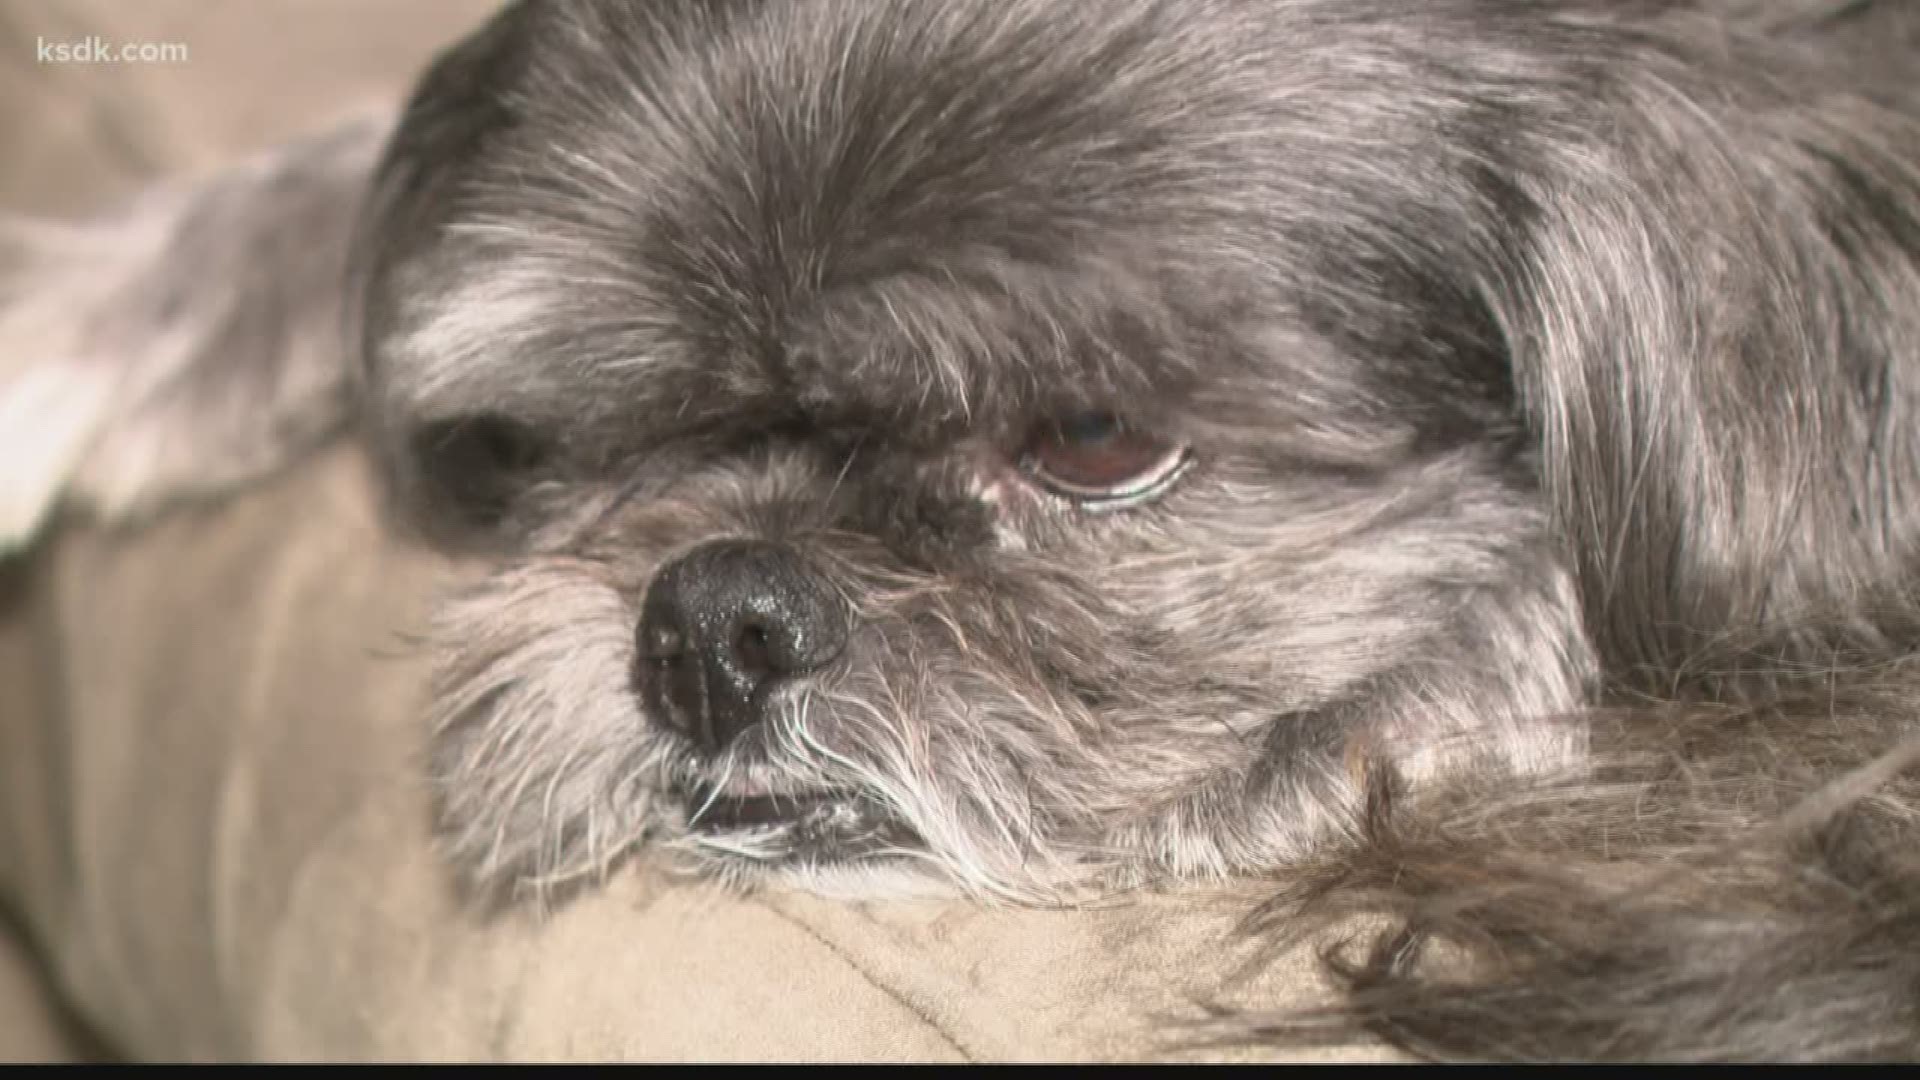 The Shih Tzu-mix named Stonewall Brown got its tail sucked up by the robot vacuum while taking a nap in the family’s home.